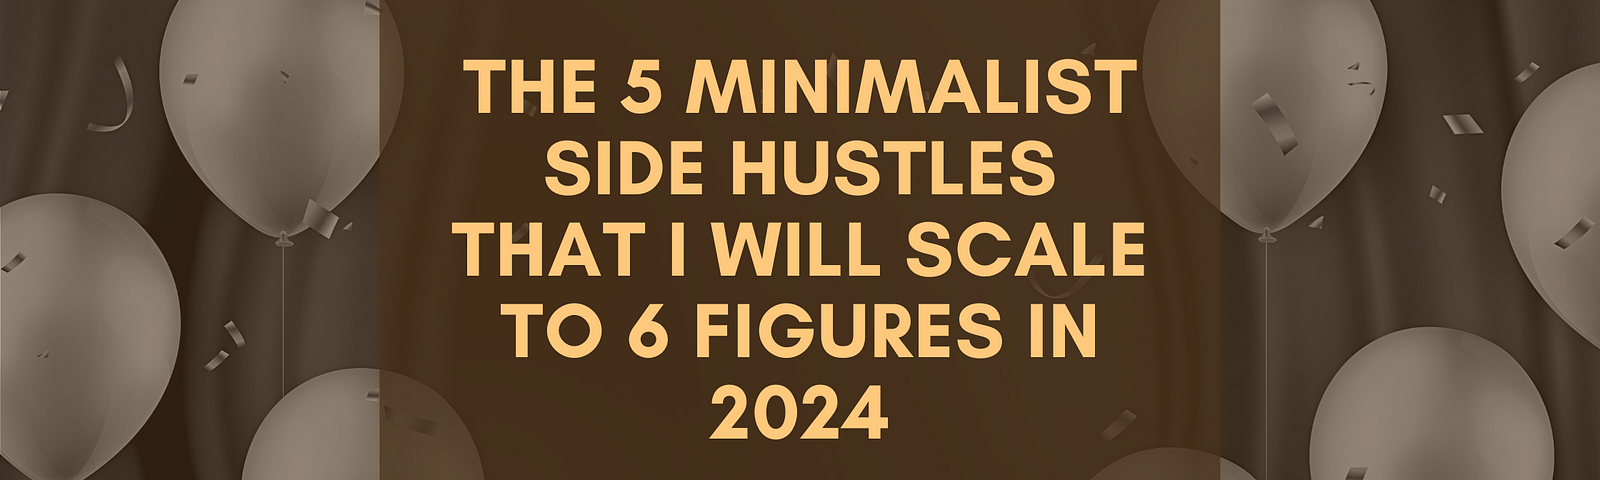 The 5 Minimalist Side Hustles That I Will Scale to 6 Figures In 2024